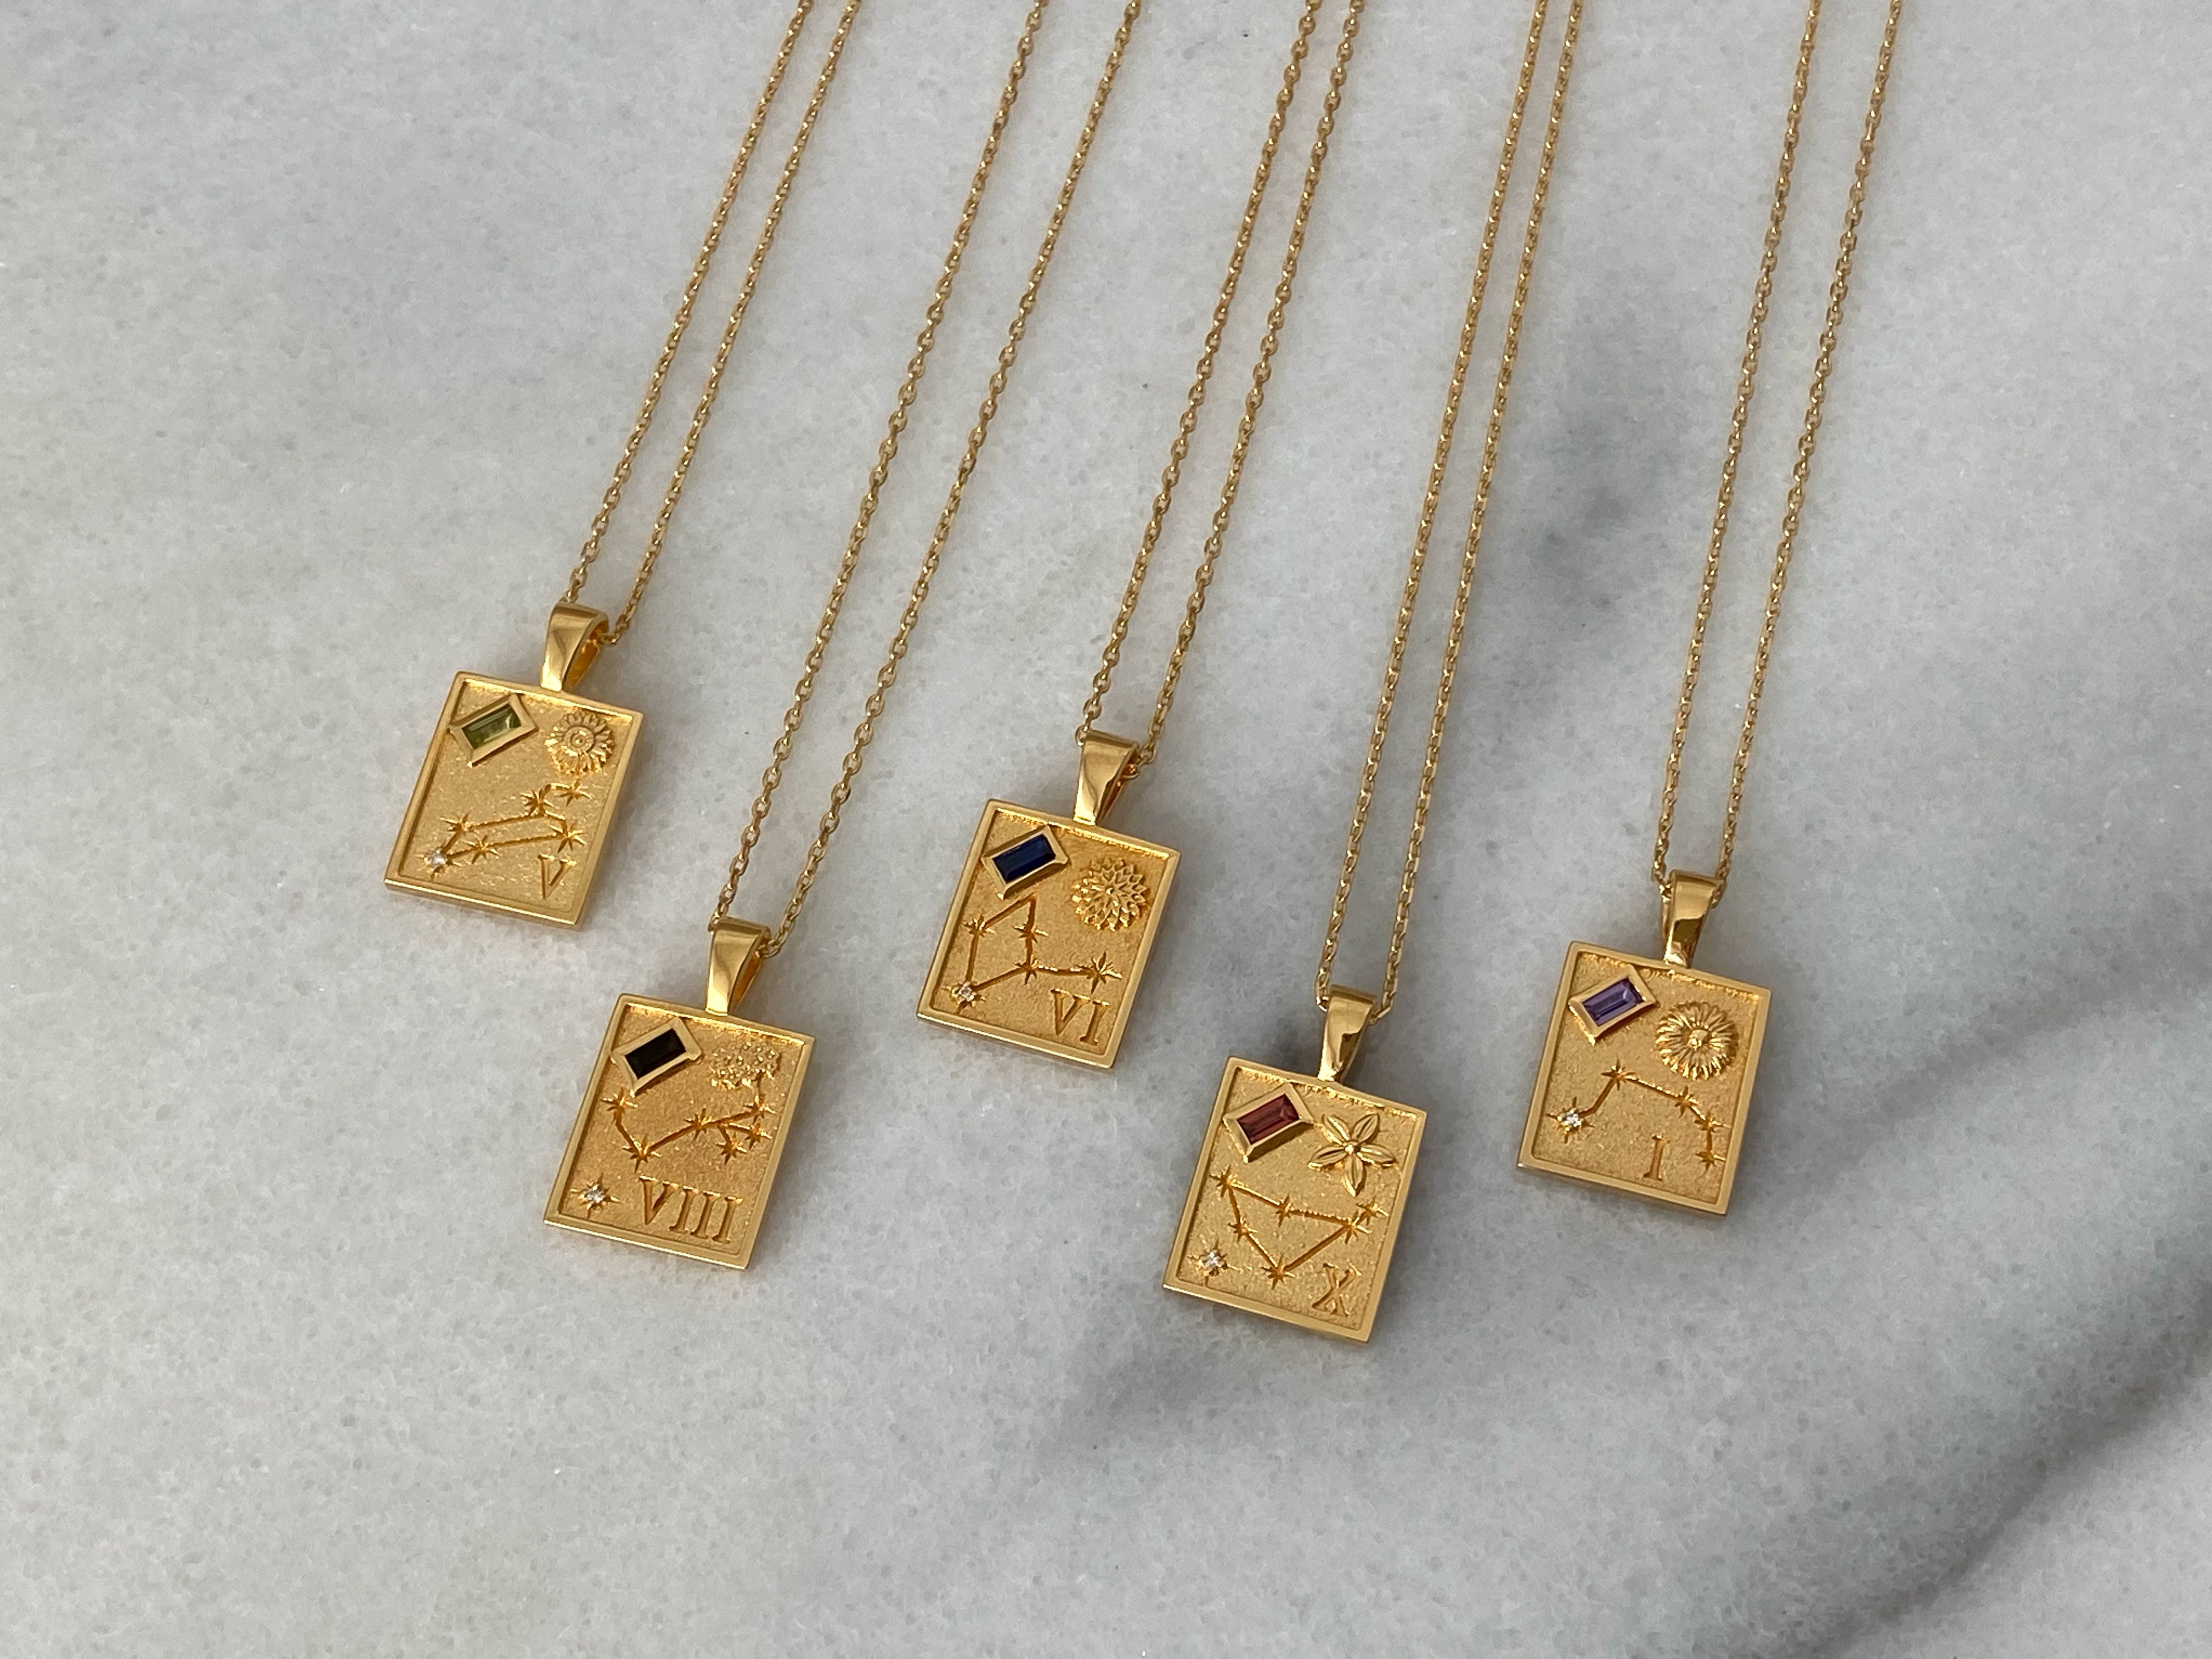 Zodiac Collection: Jewelry with Meaning